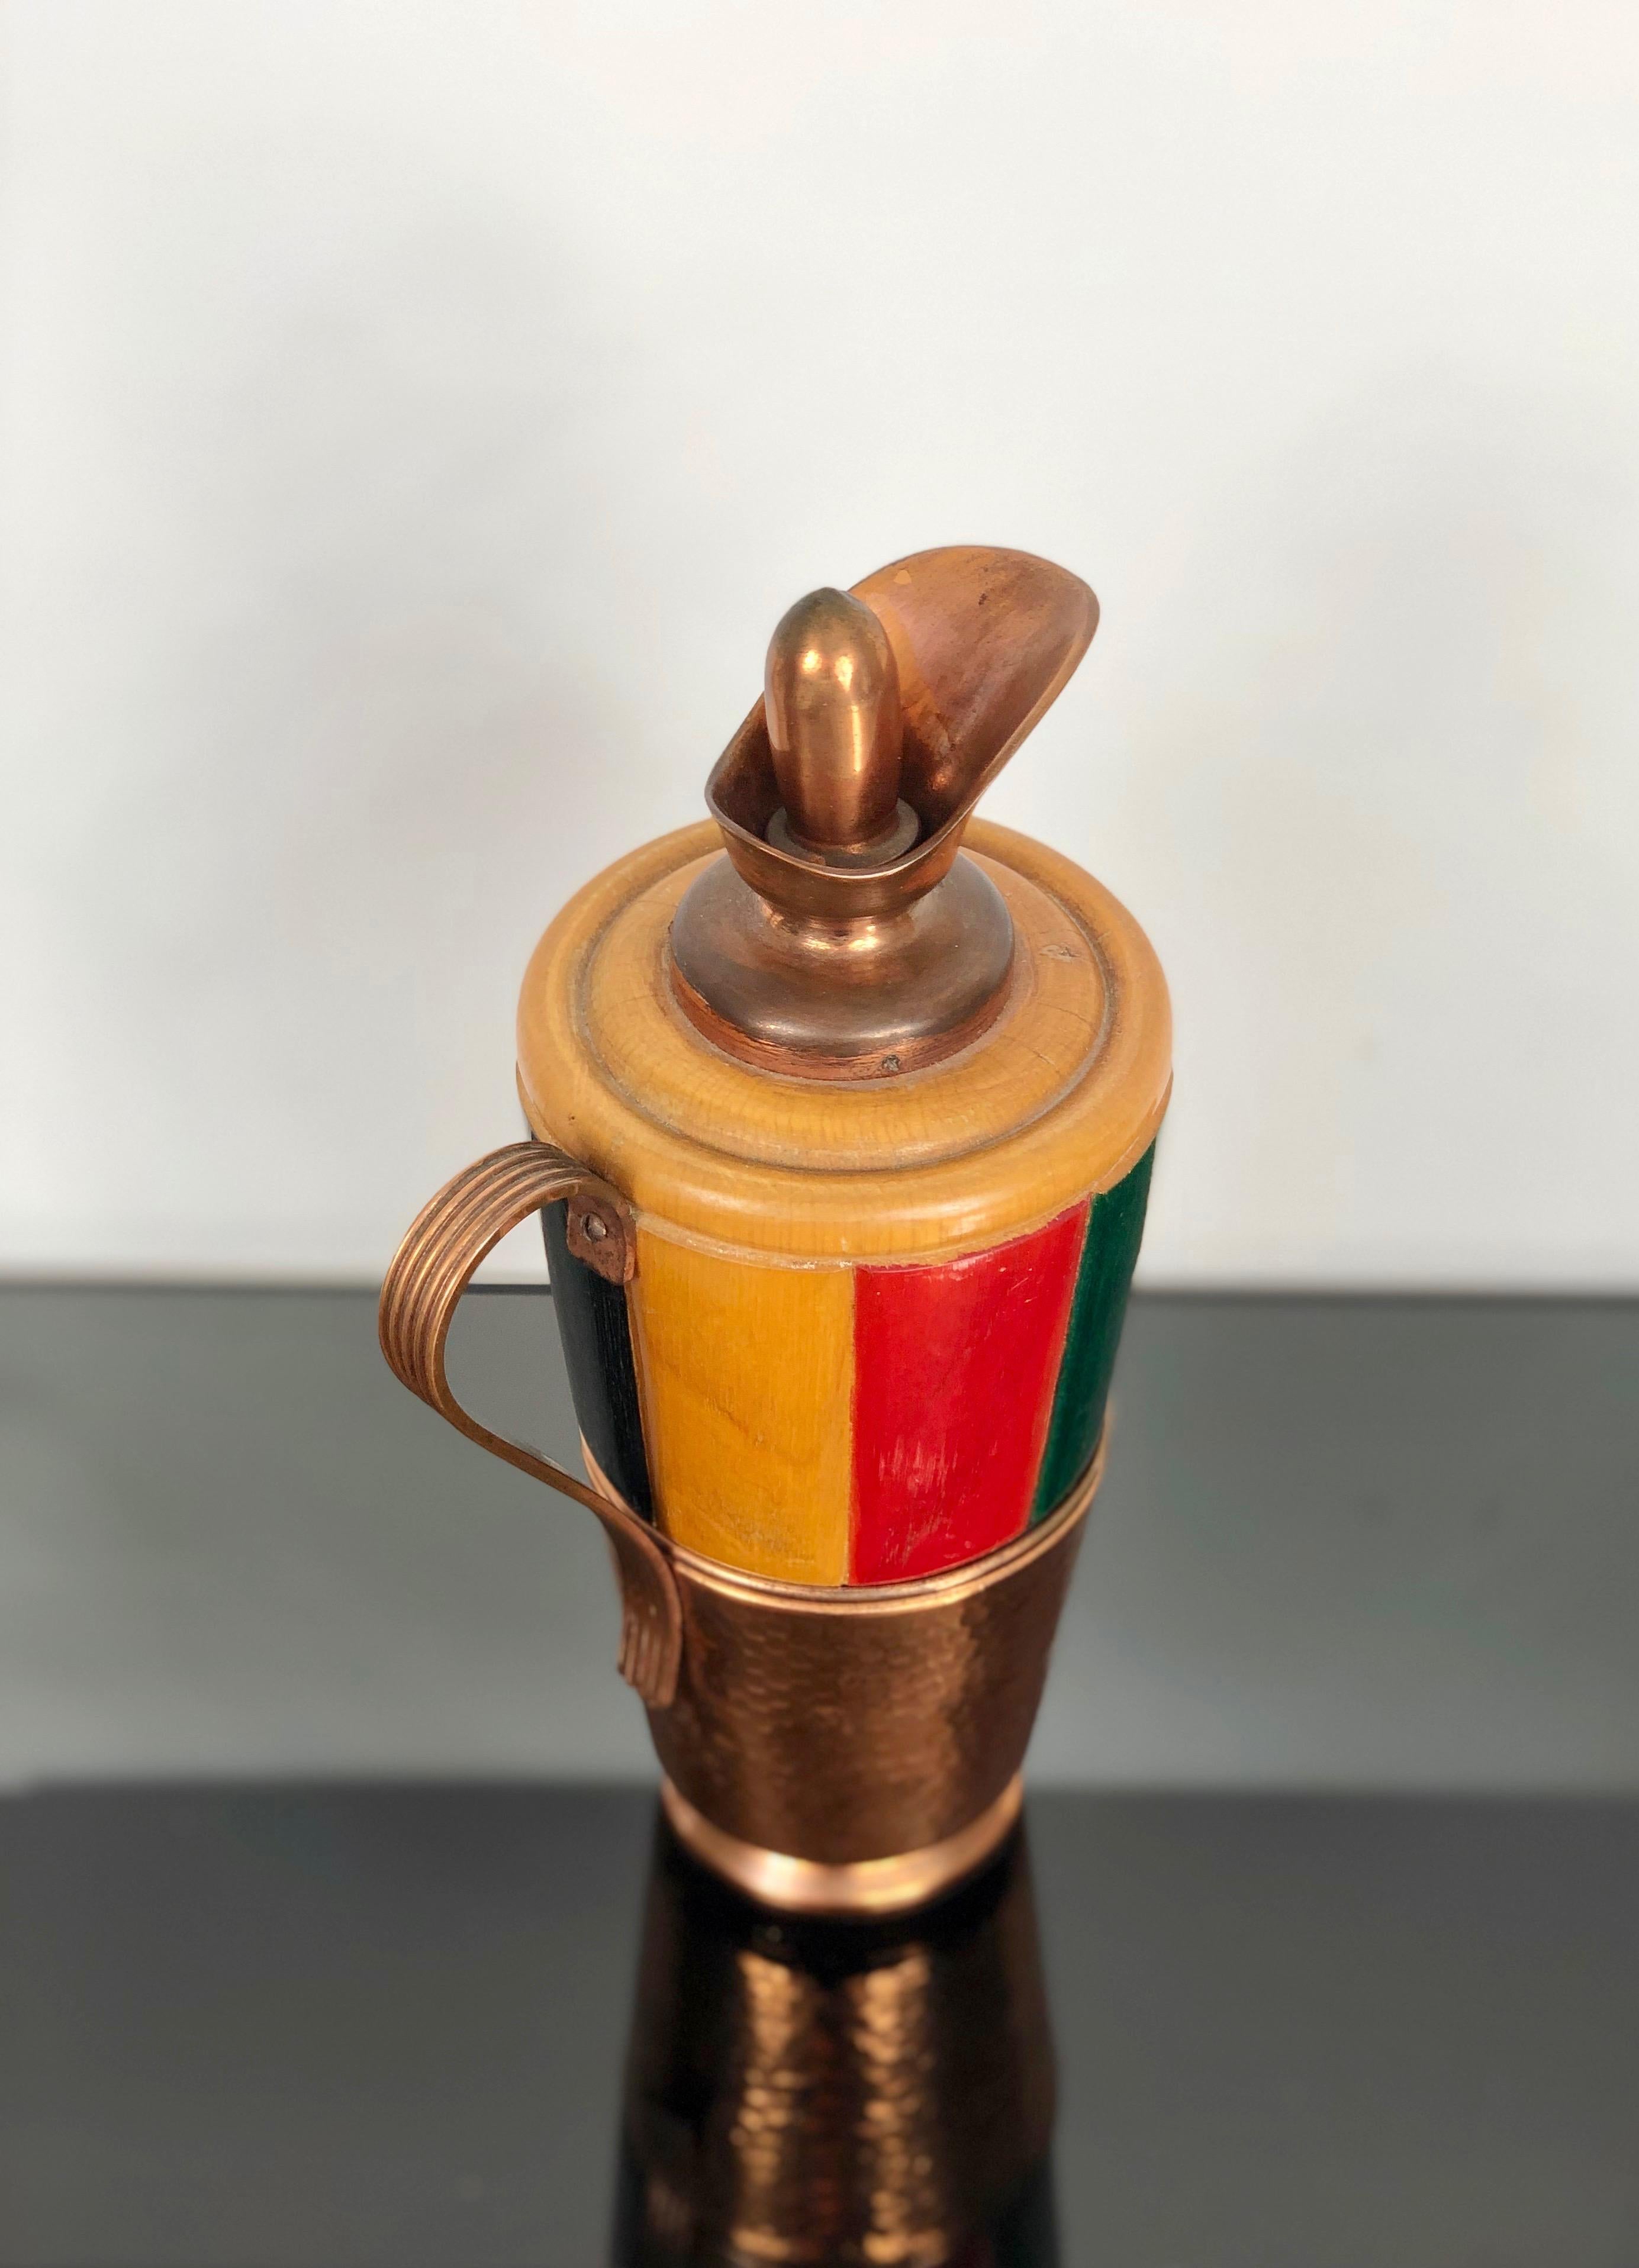 Italian Copper and Wood Thermos Decanter Pitcher by Aldo Tura, Macabo, Italy, 1950s For Sale